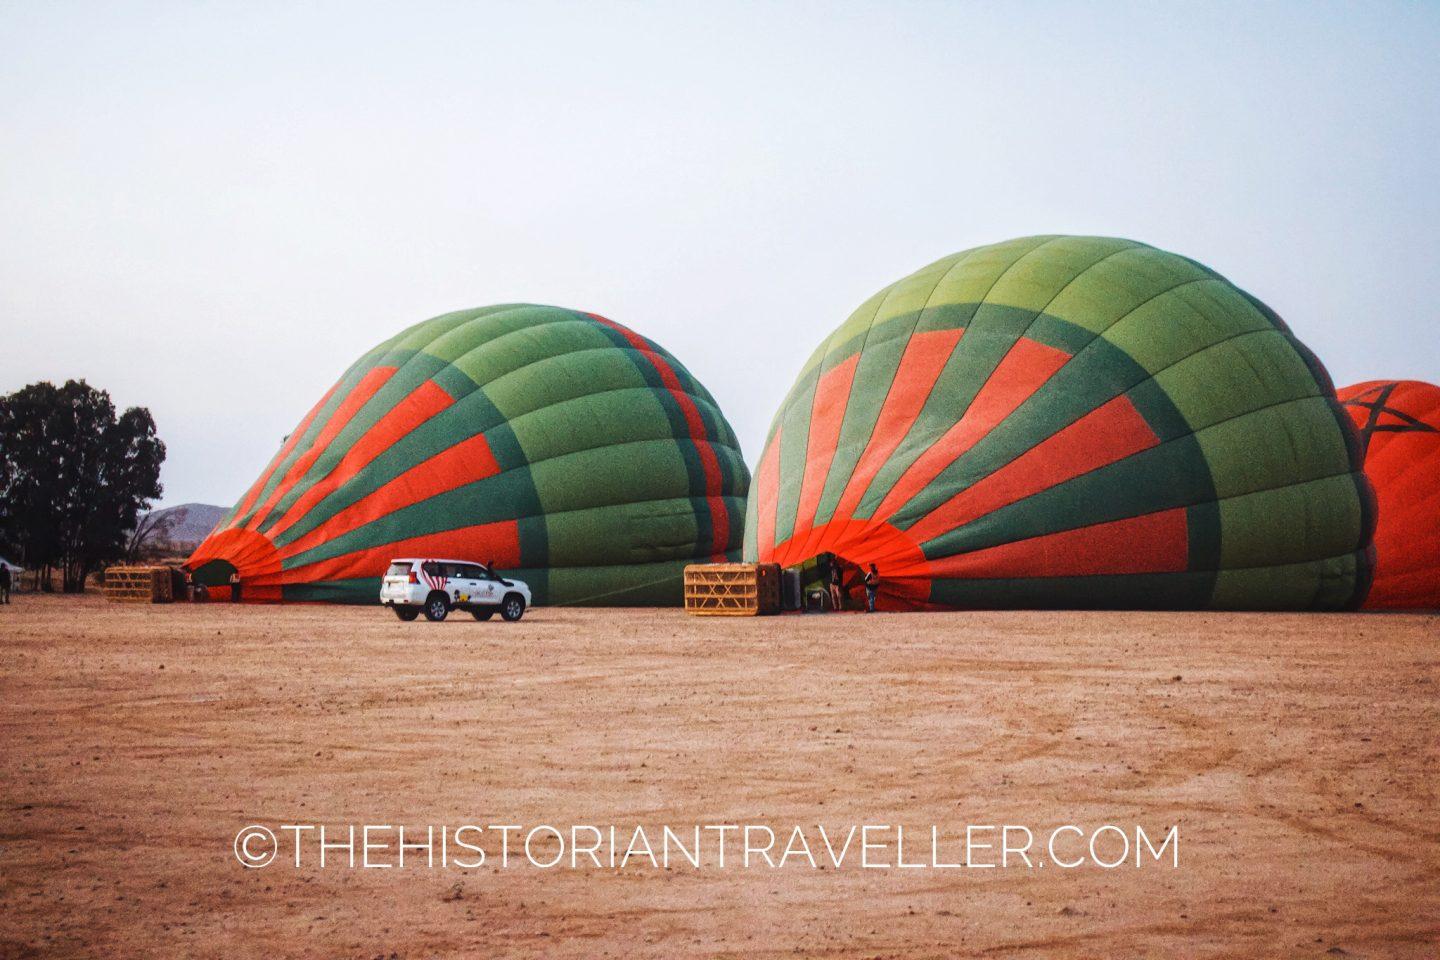 Two inflating hot air balloons and a car in Marrakech